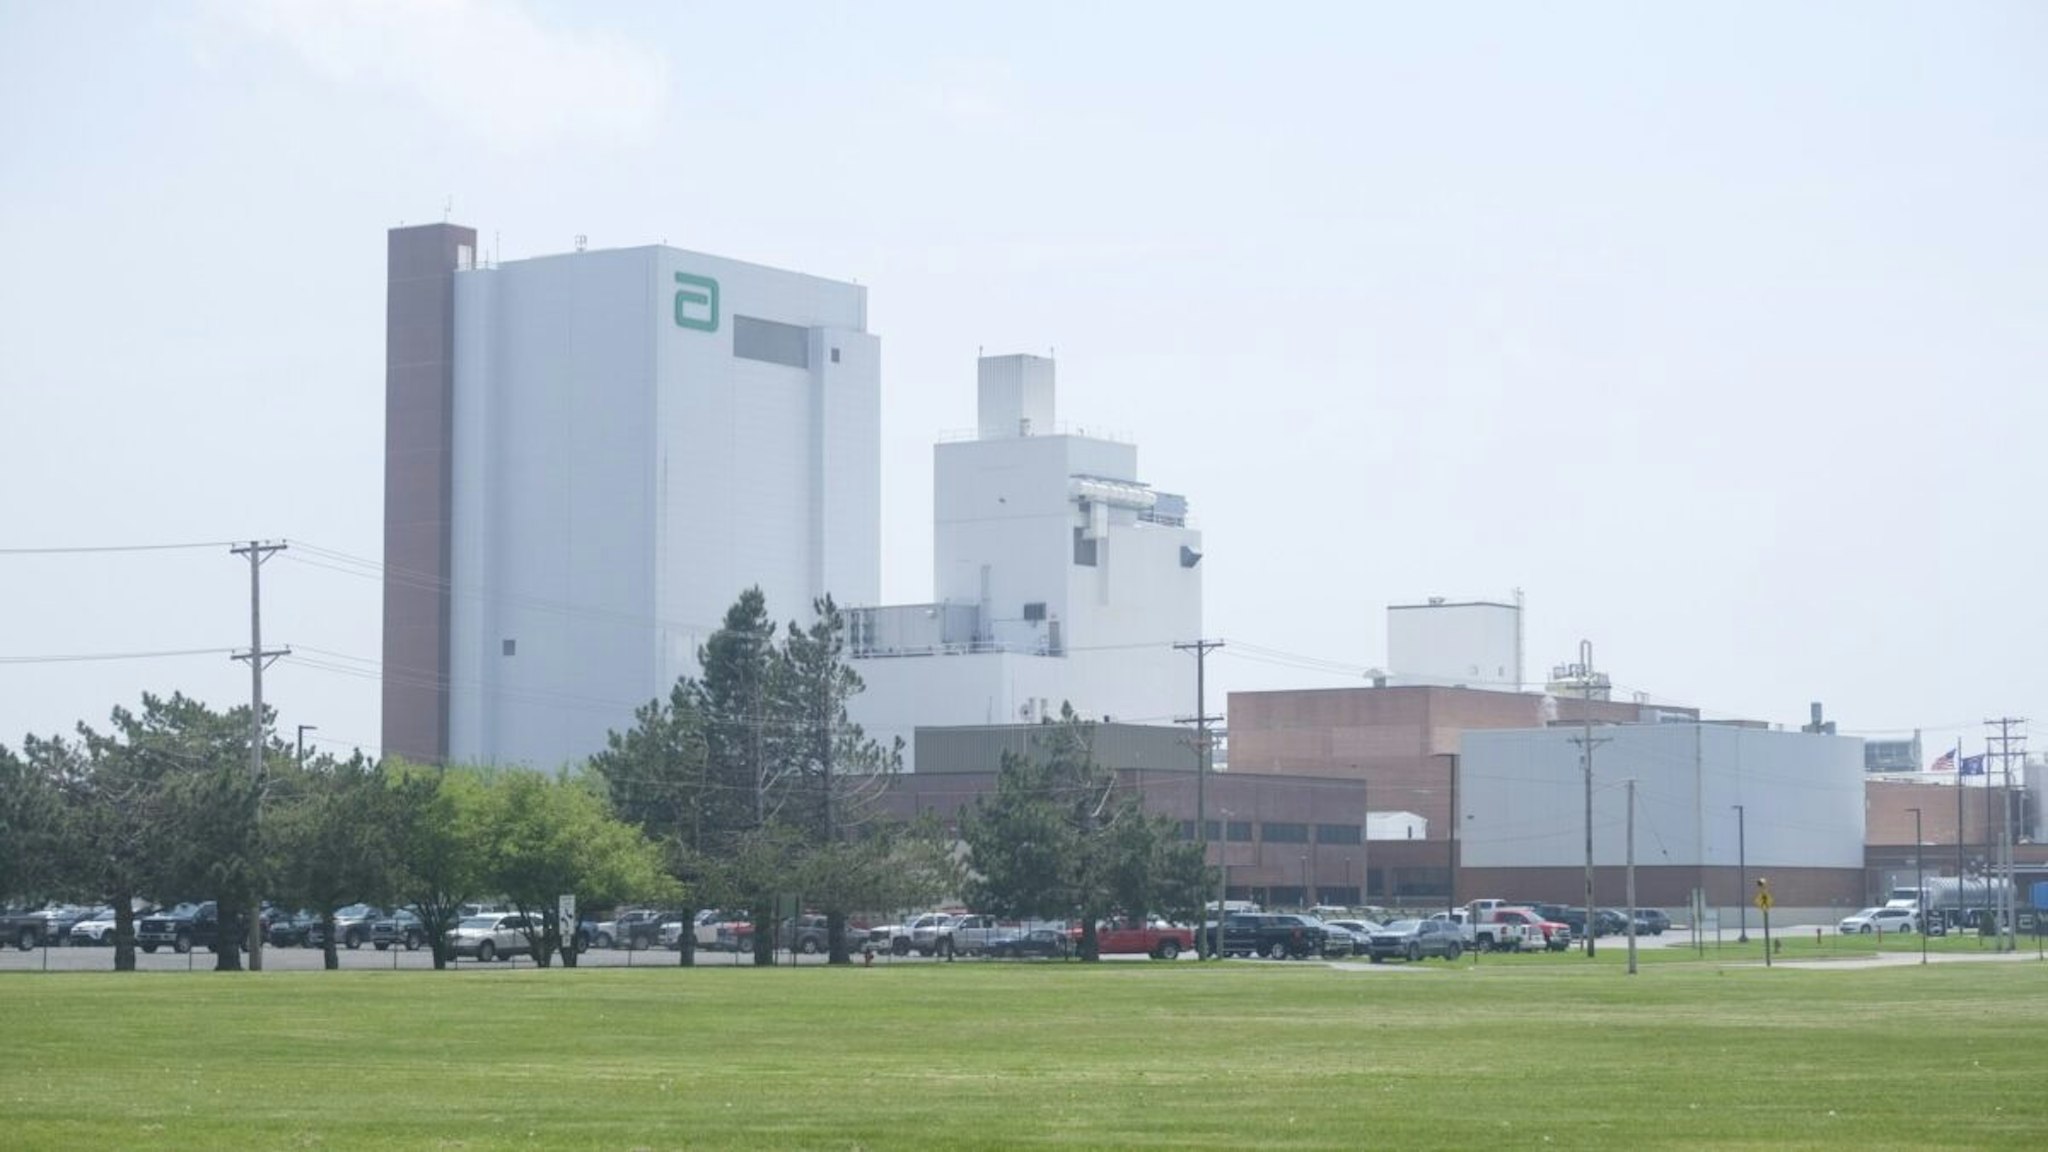 The Abbott Nutrition factory in Sturgis, Michigan, US, on Thursday, May 19, 2022.